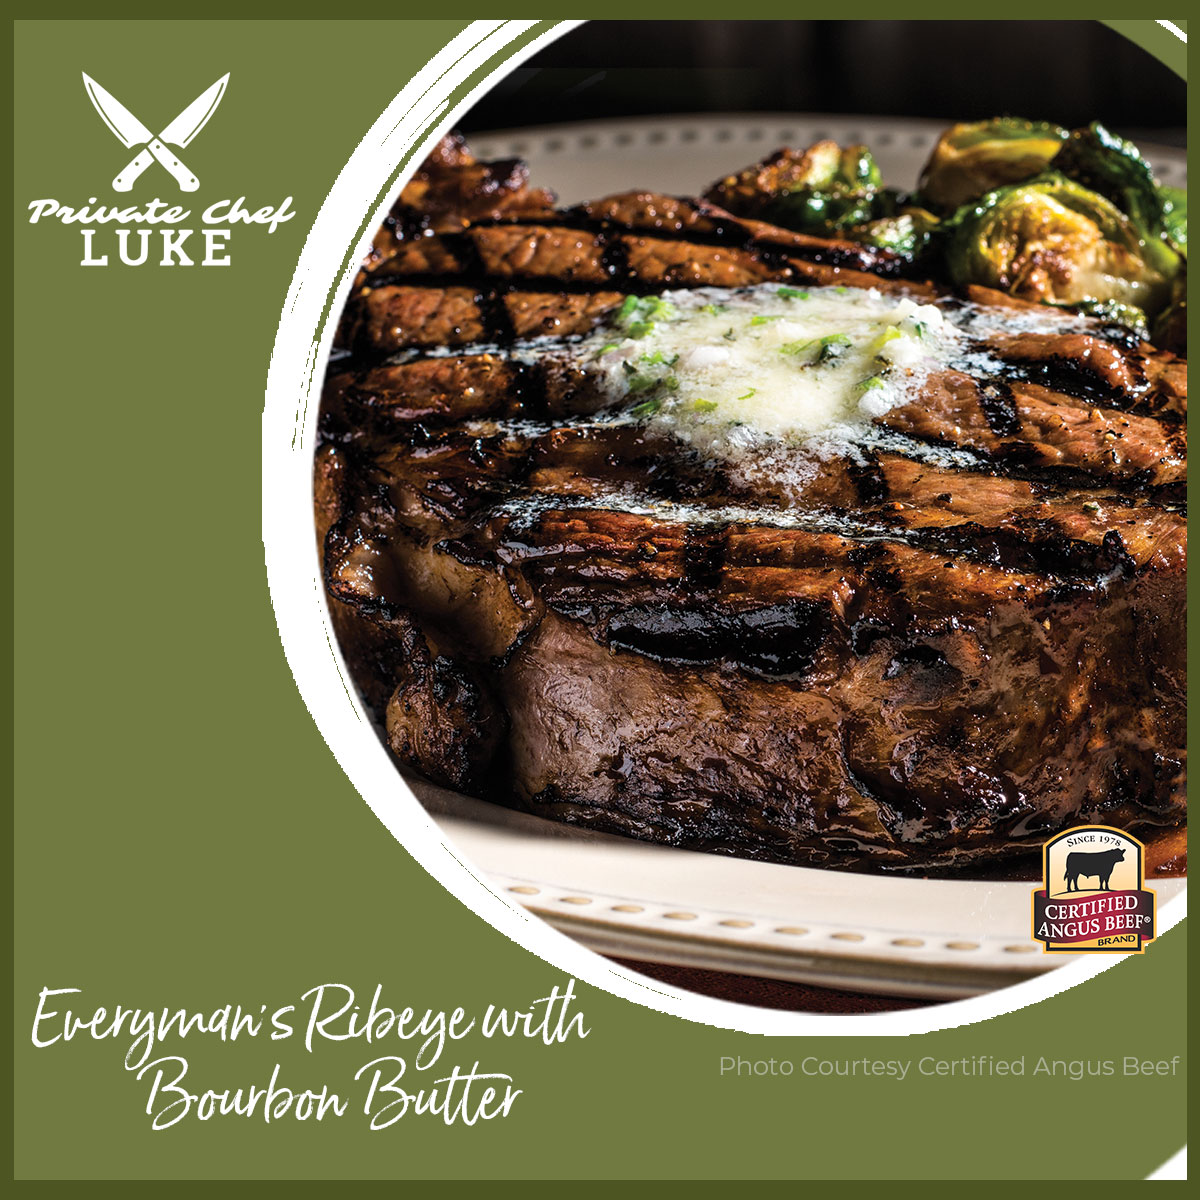 View and Download the Recipe and Tips for preparing Chef Luke's Weeknight Steak Diane featuring the Certified Angus Beef featured in Everyman's Ribeye with Bourbon Butter.